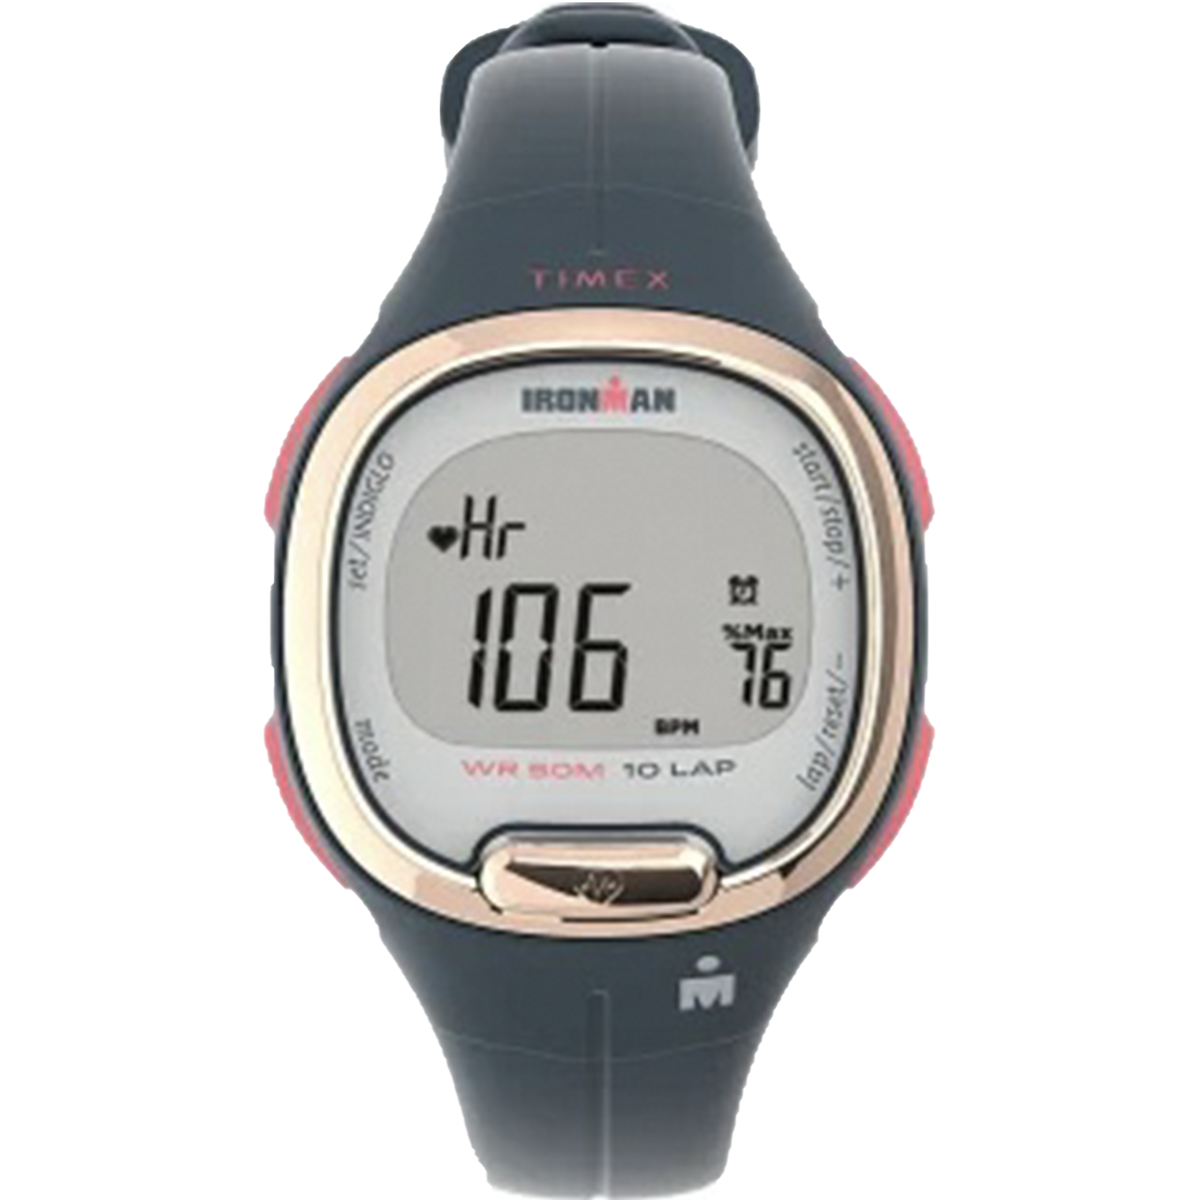 Timex - Ironman Transit with Heart Rate Monitor